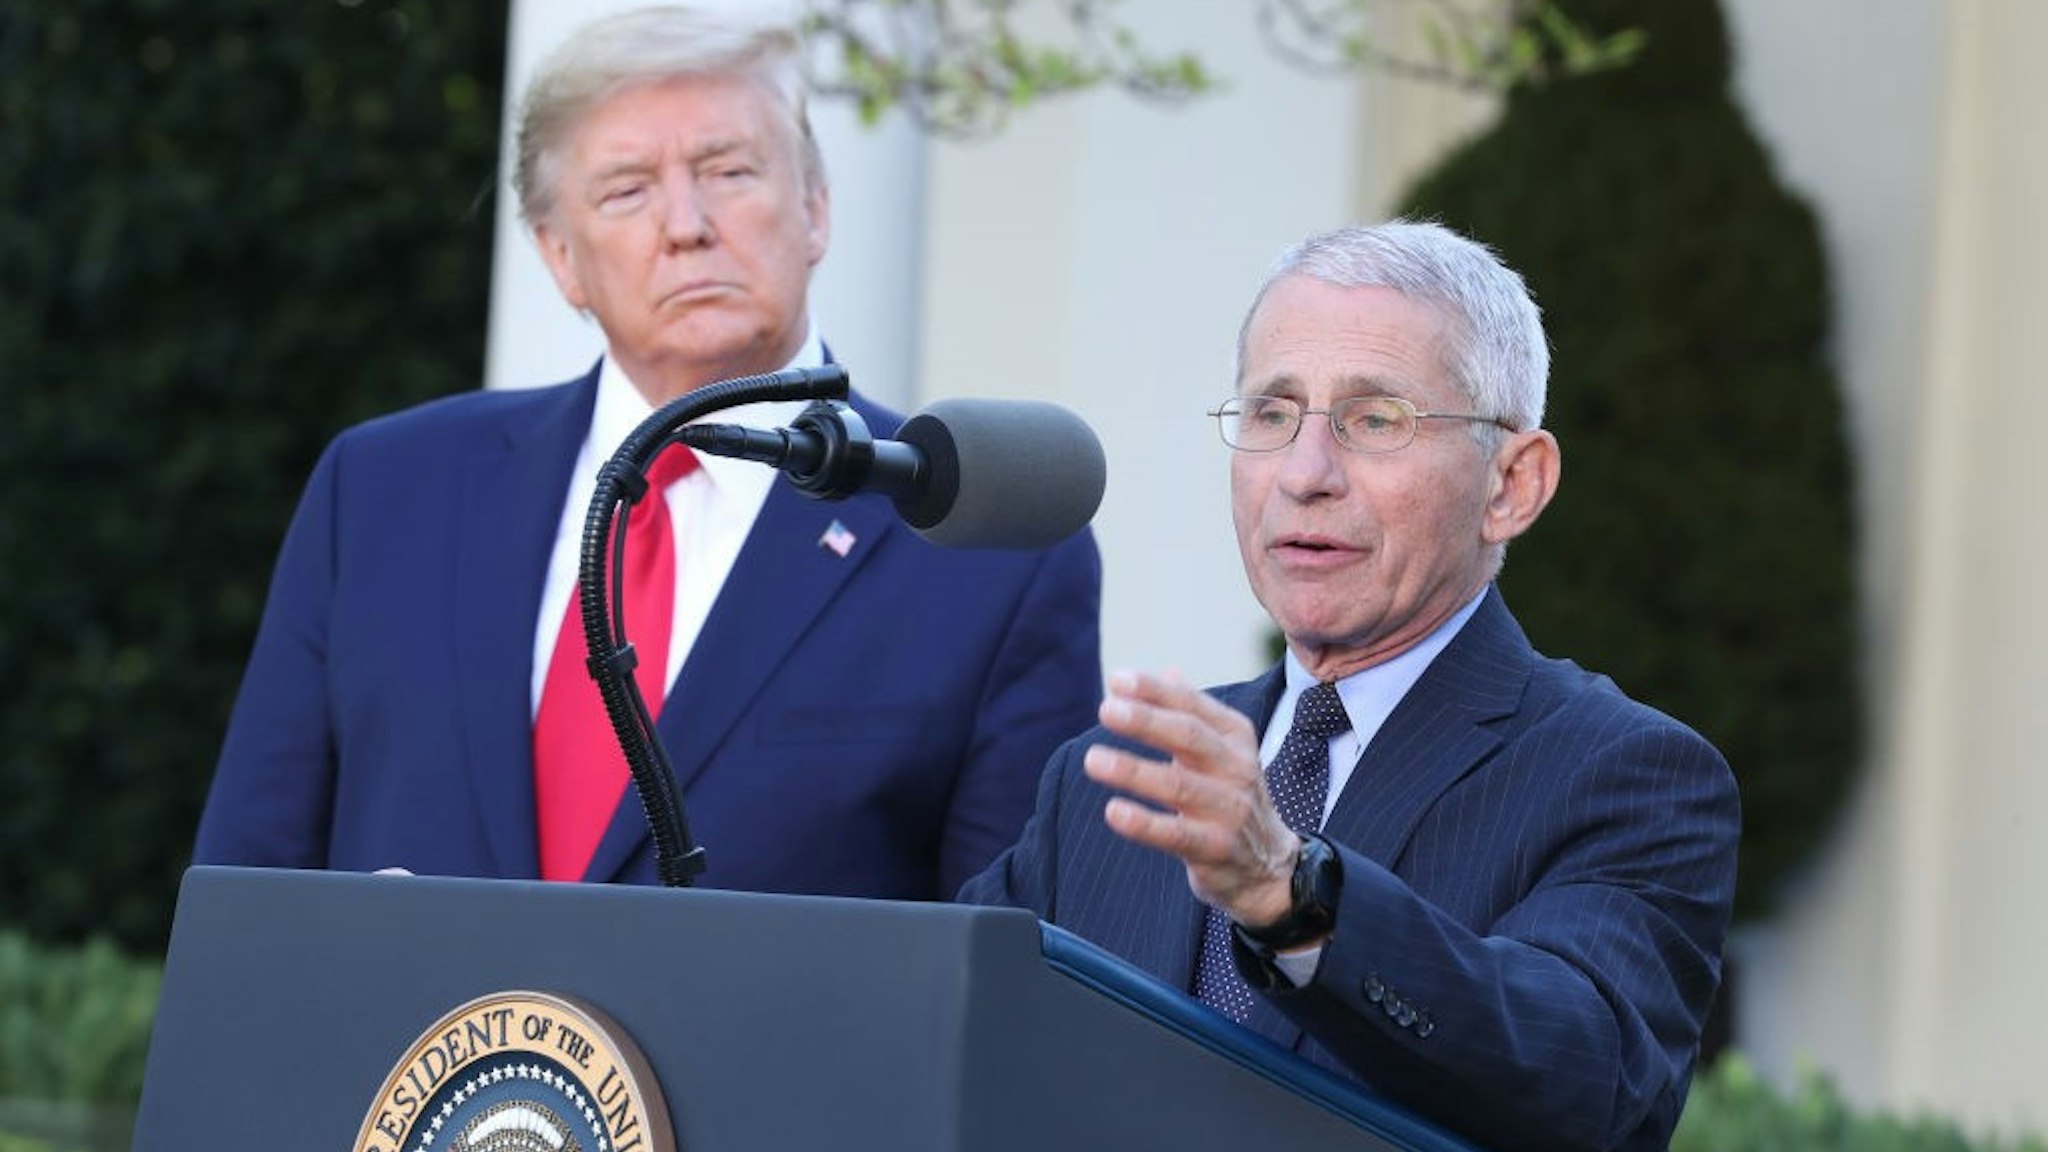 Anthony Fauci, director of the National Institute of Allergy and Infectious Diseases, right, speaks as U.S. President Donald Trump listens during a Coronavirus Task Force news conference in the Rose Garden of the White House in Washington, D.C., U.S., on Monday, March 30, 2020. Trump said he would now extend social distancing measures until at least April 30. Photographer